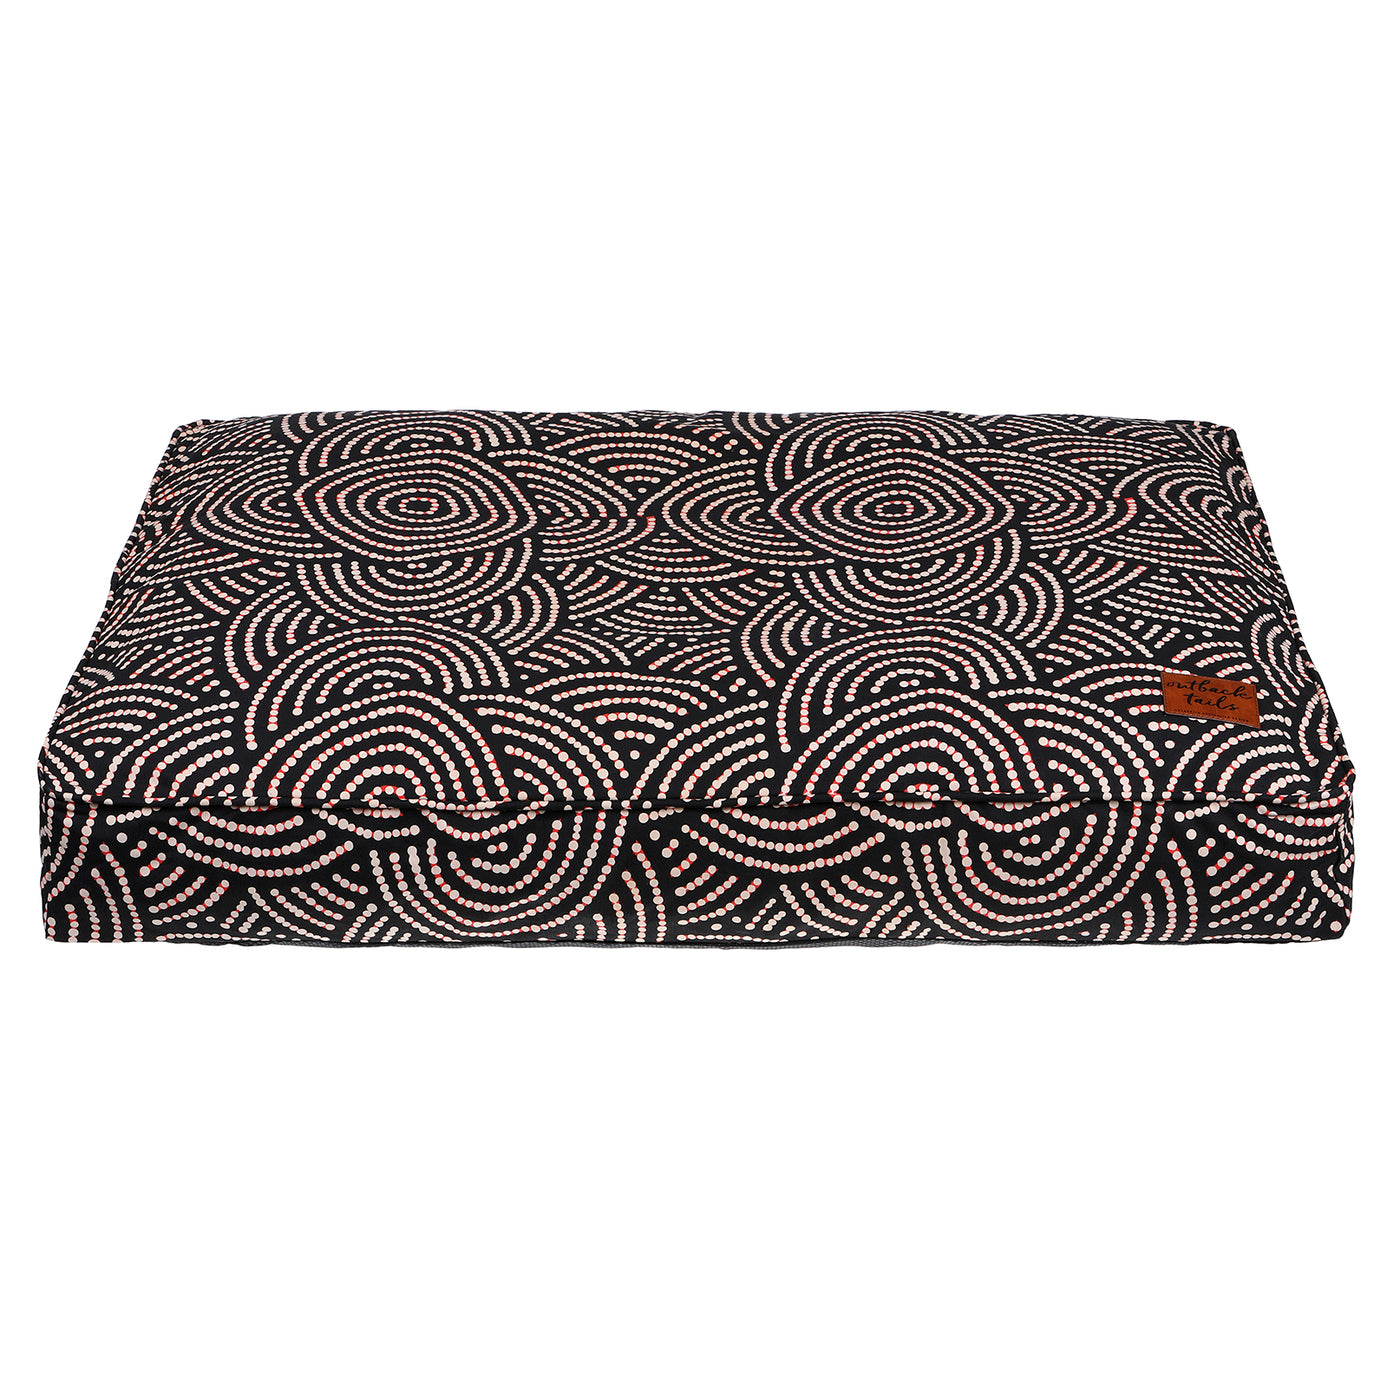 Rectangular Therapeutic Dog Bed - Fire Country Dreaming